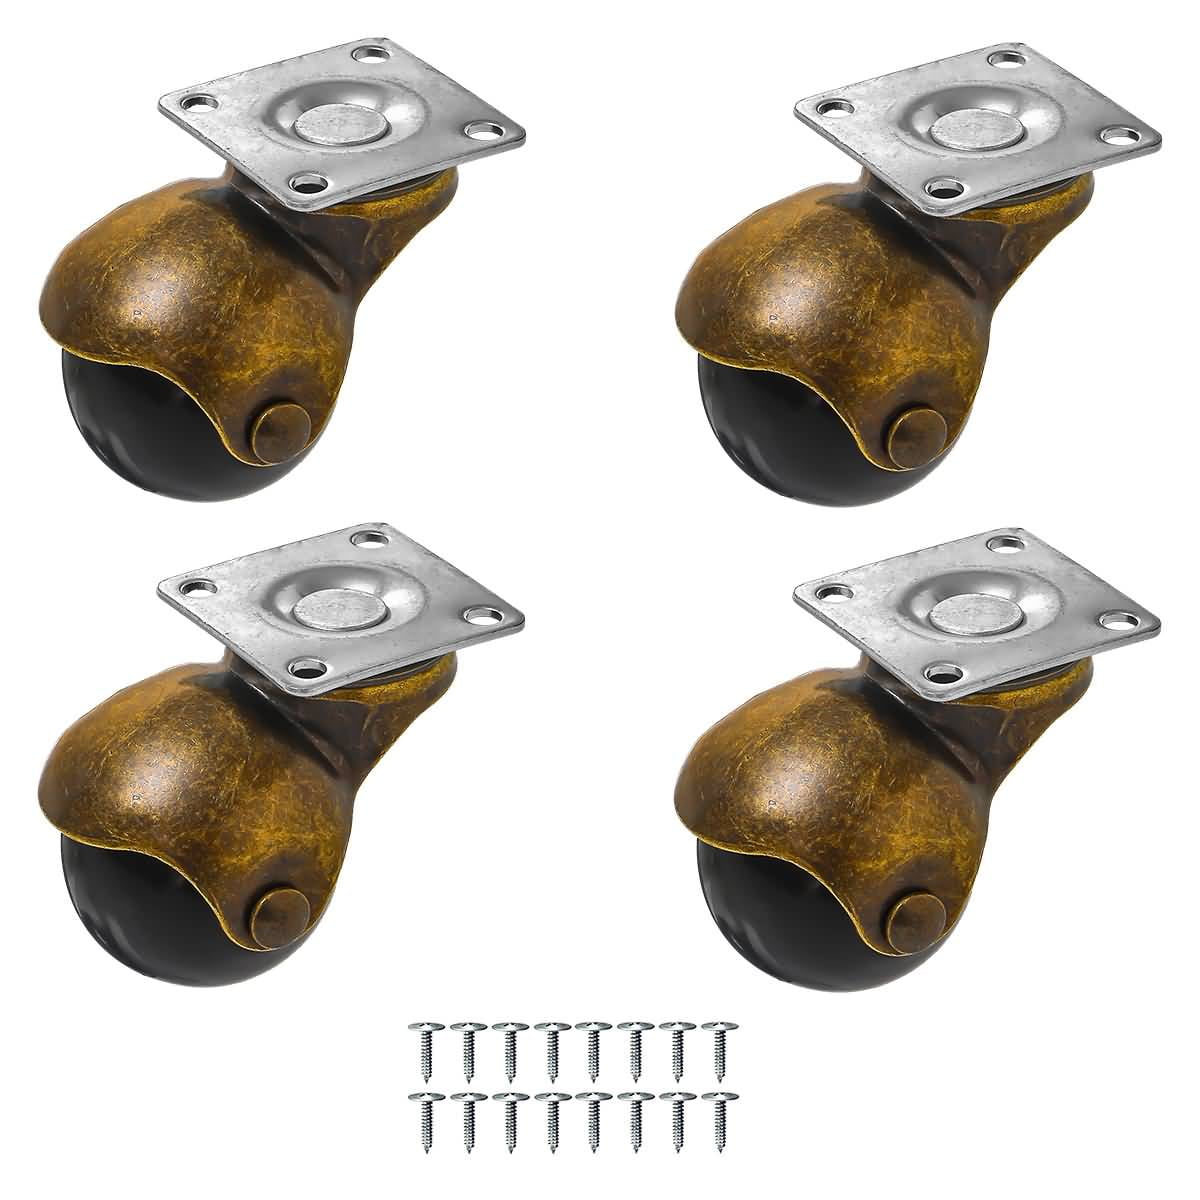 Pack of 4 Antique Copper Ball Swivel Caster 1.5'' Caster Wheels for Furnitures 